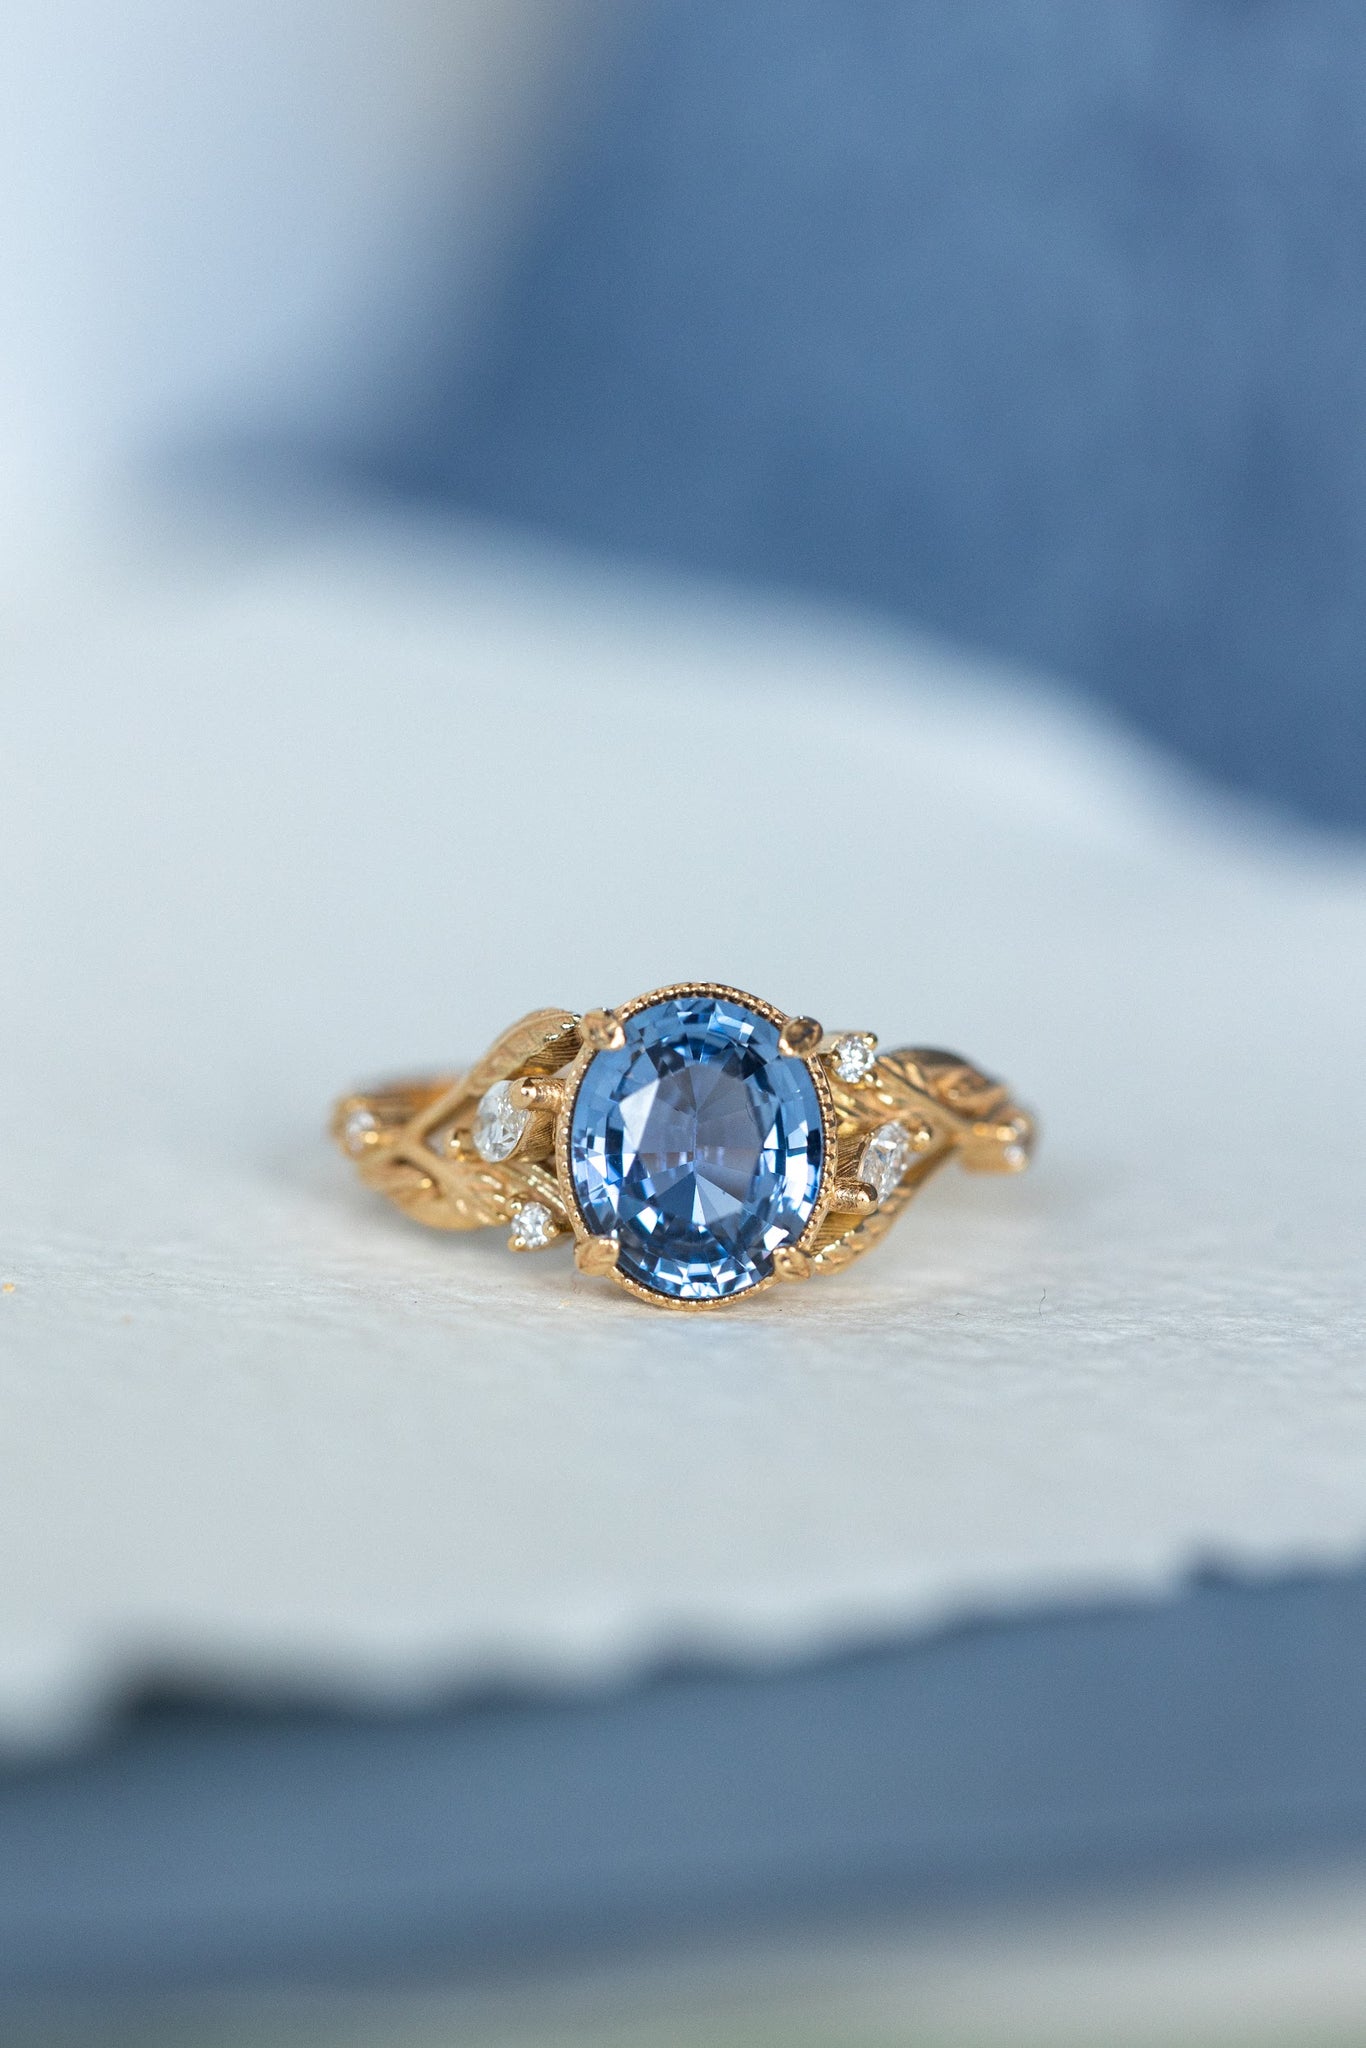 READY TO SHIP: Patricia ring in 14K yellow gold, natural sapphire oval cut 8x6* mm, accent natural diamonds, AVAILABLE RING SIZES: 6-8US - Eden Garden Jewelry™